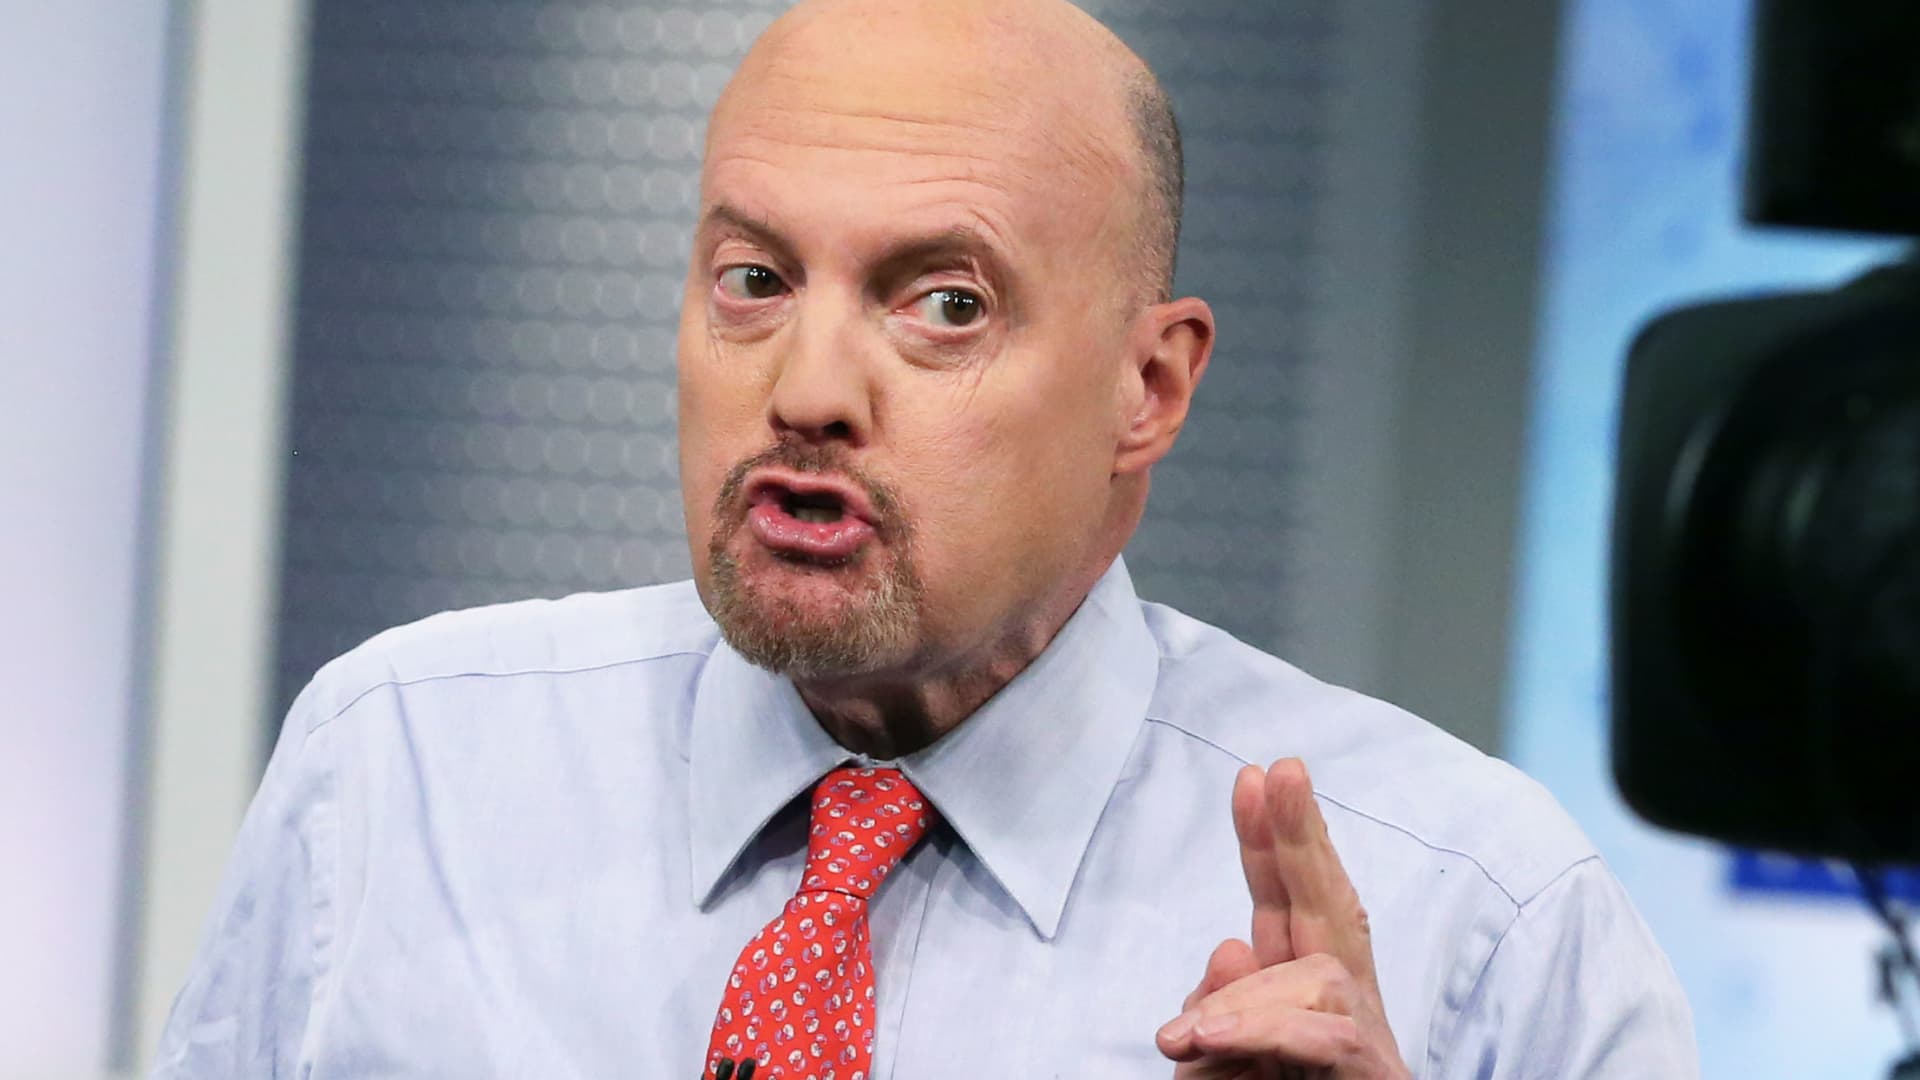 Jim Cramer expects the decline in June to hold and mark the bottom